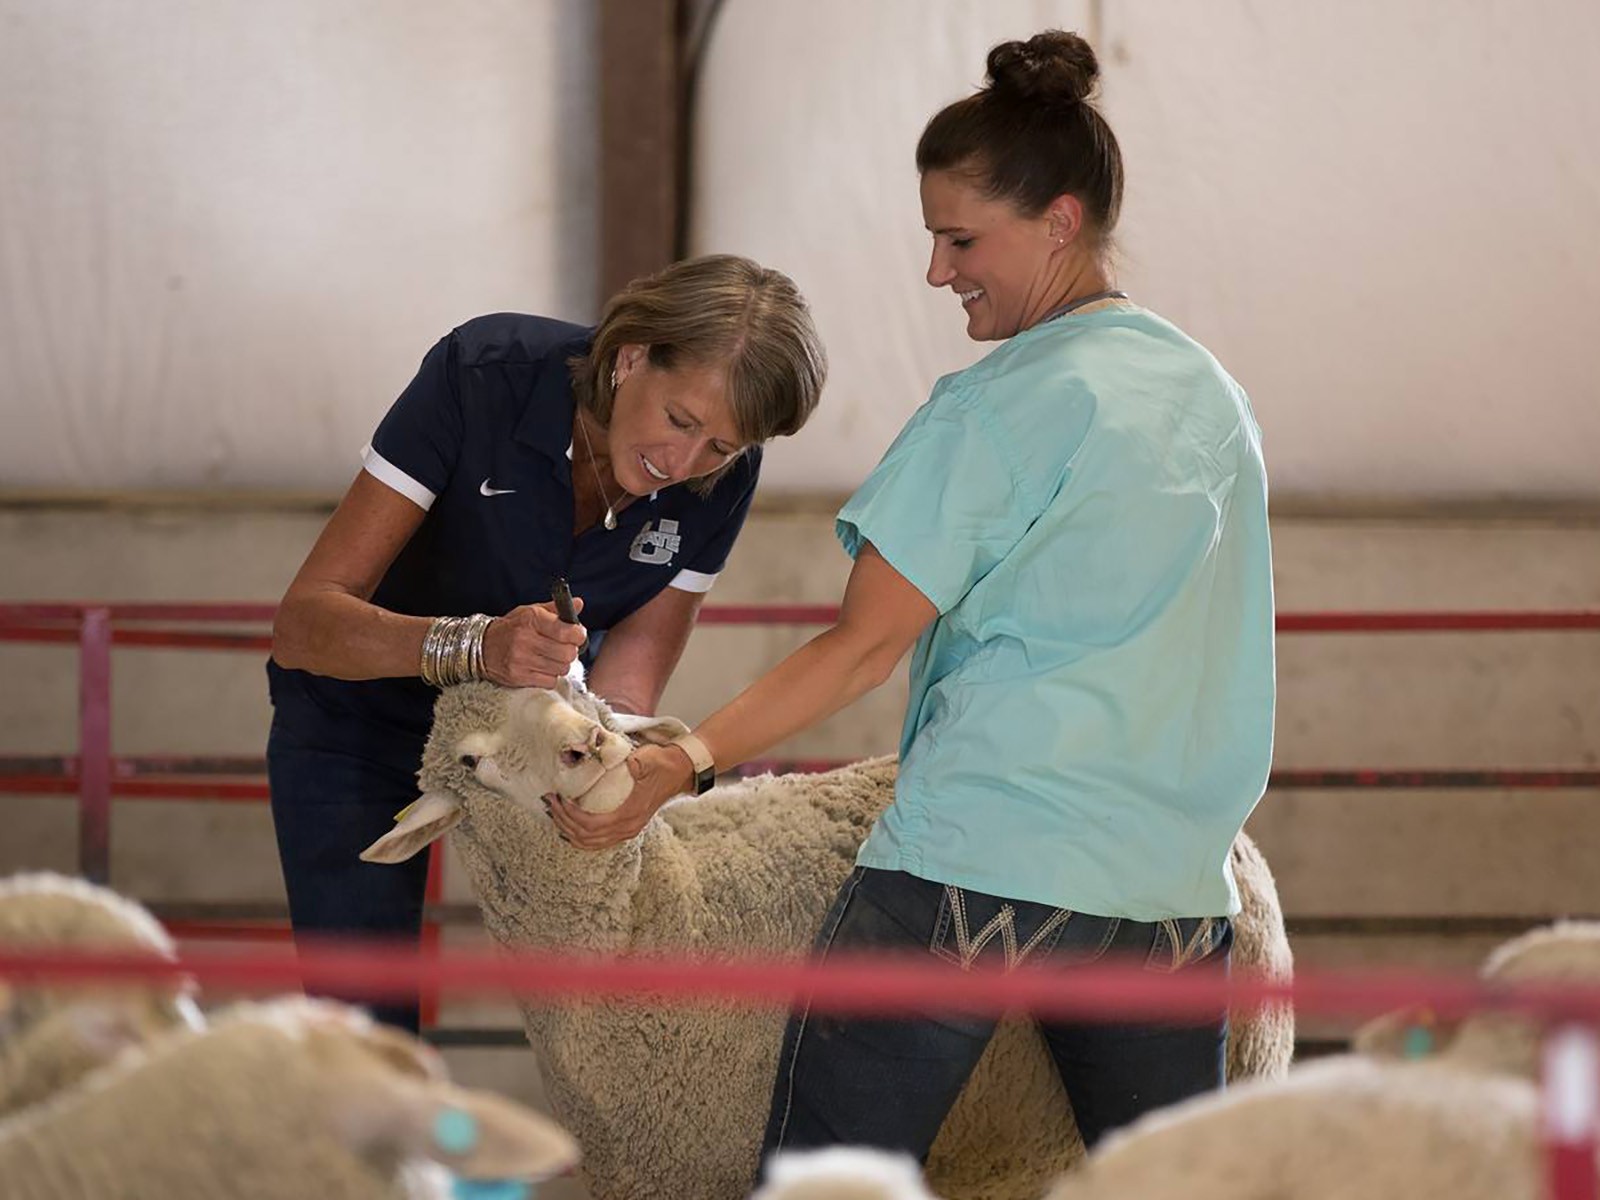 USU President Noelle Cockett holds a flashlight and examines the eye of a sheep.